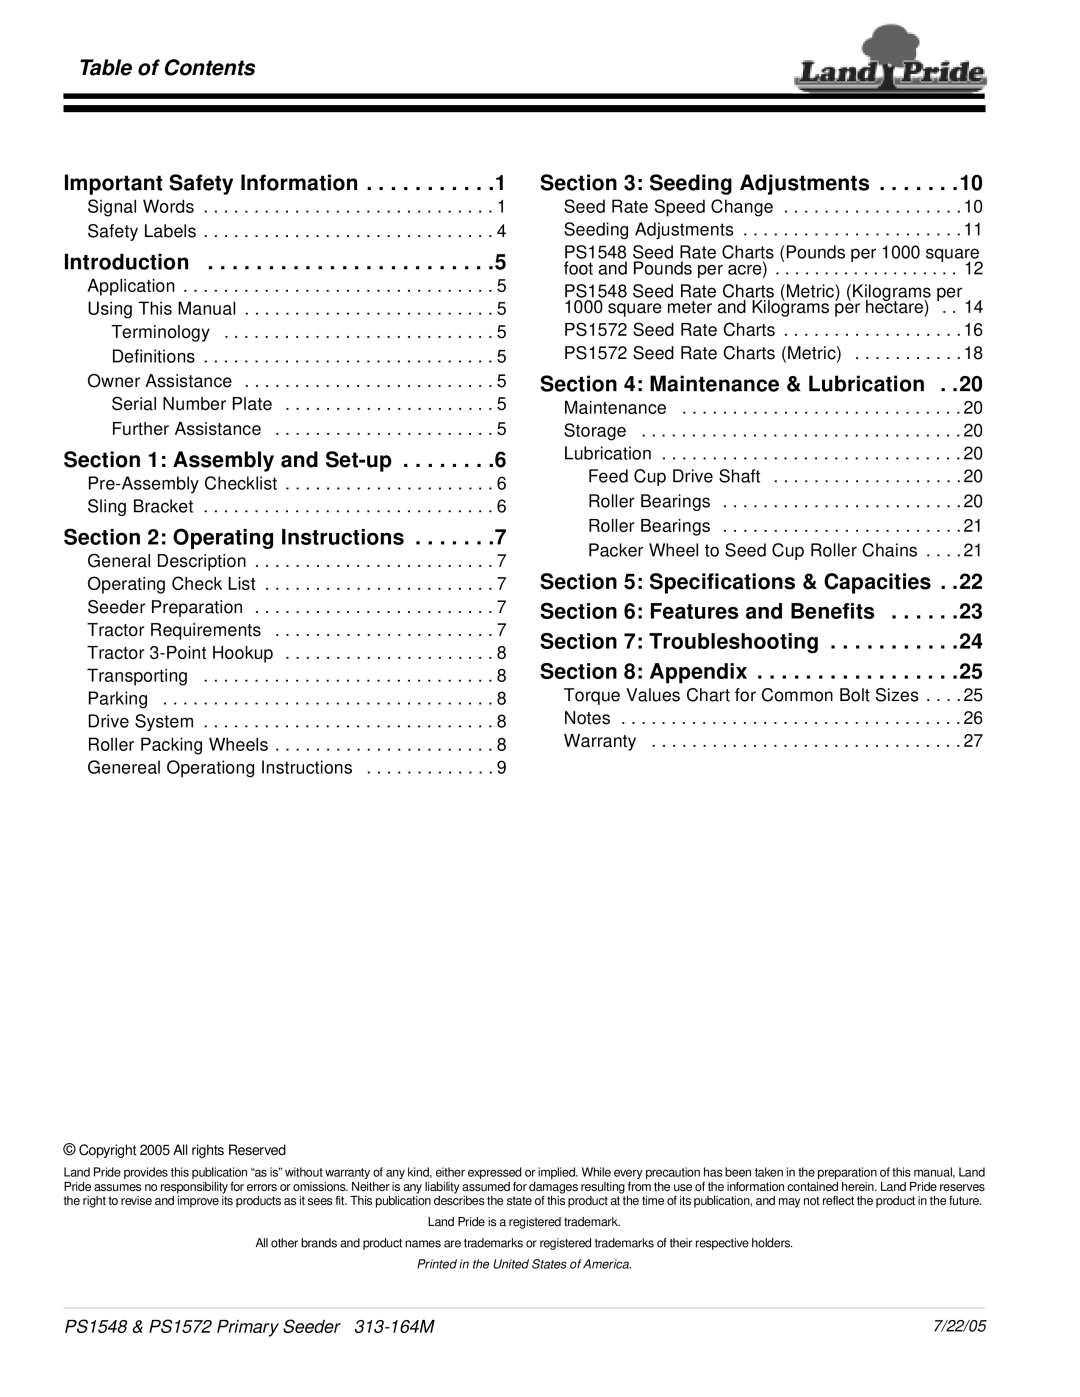 Land Pride PS1548 Table of Contents, Important Safety Information, Introduction, Assembly and Set-up, Seeding Adjustments 